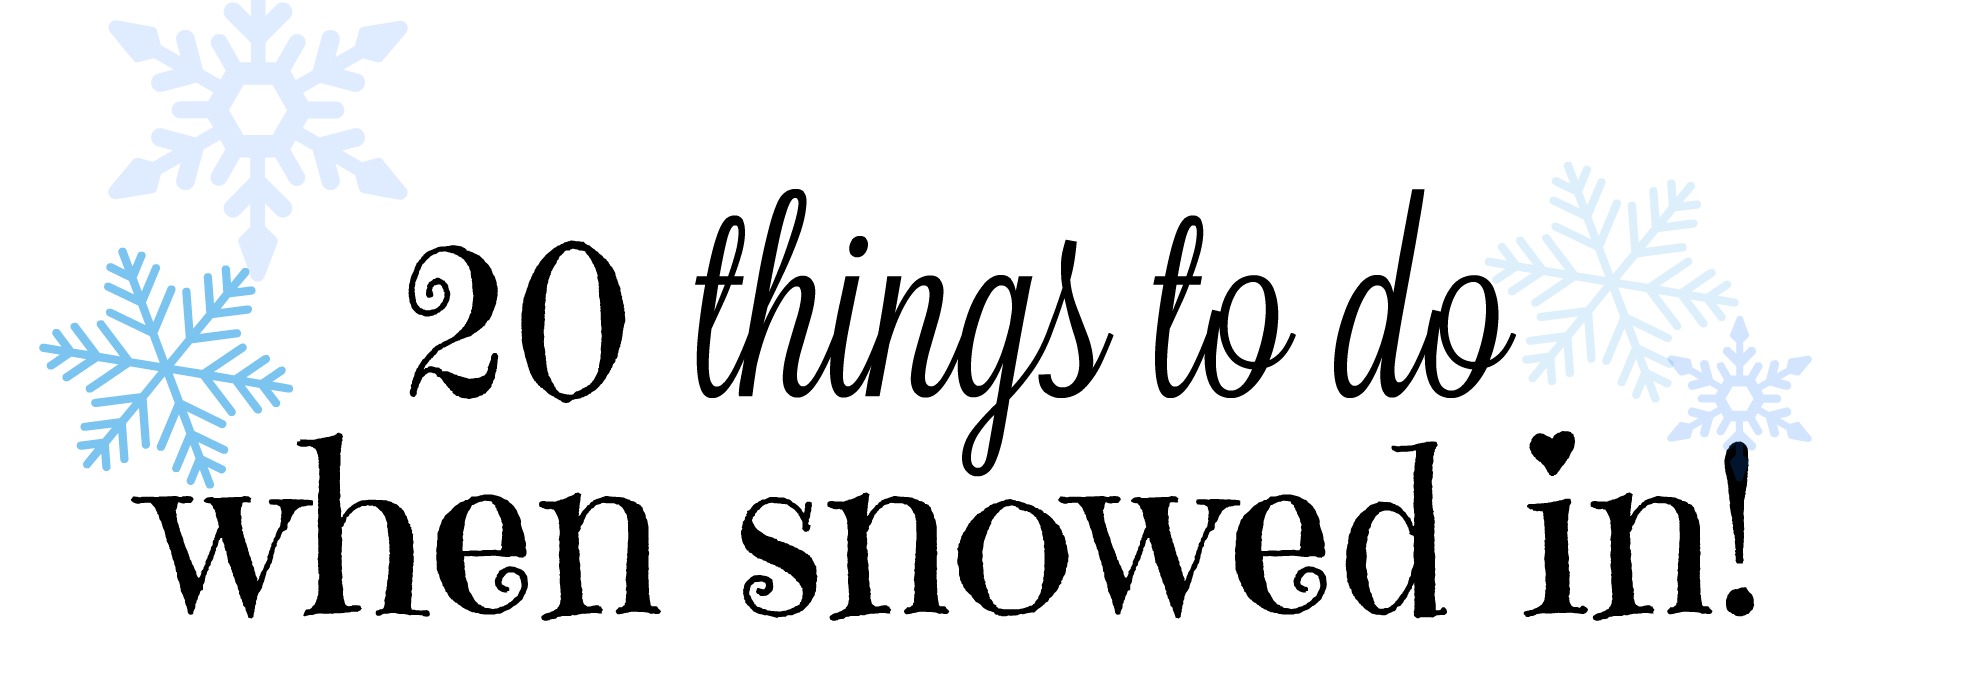 20 Things To Do When Snowed During a Blizzard